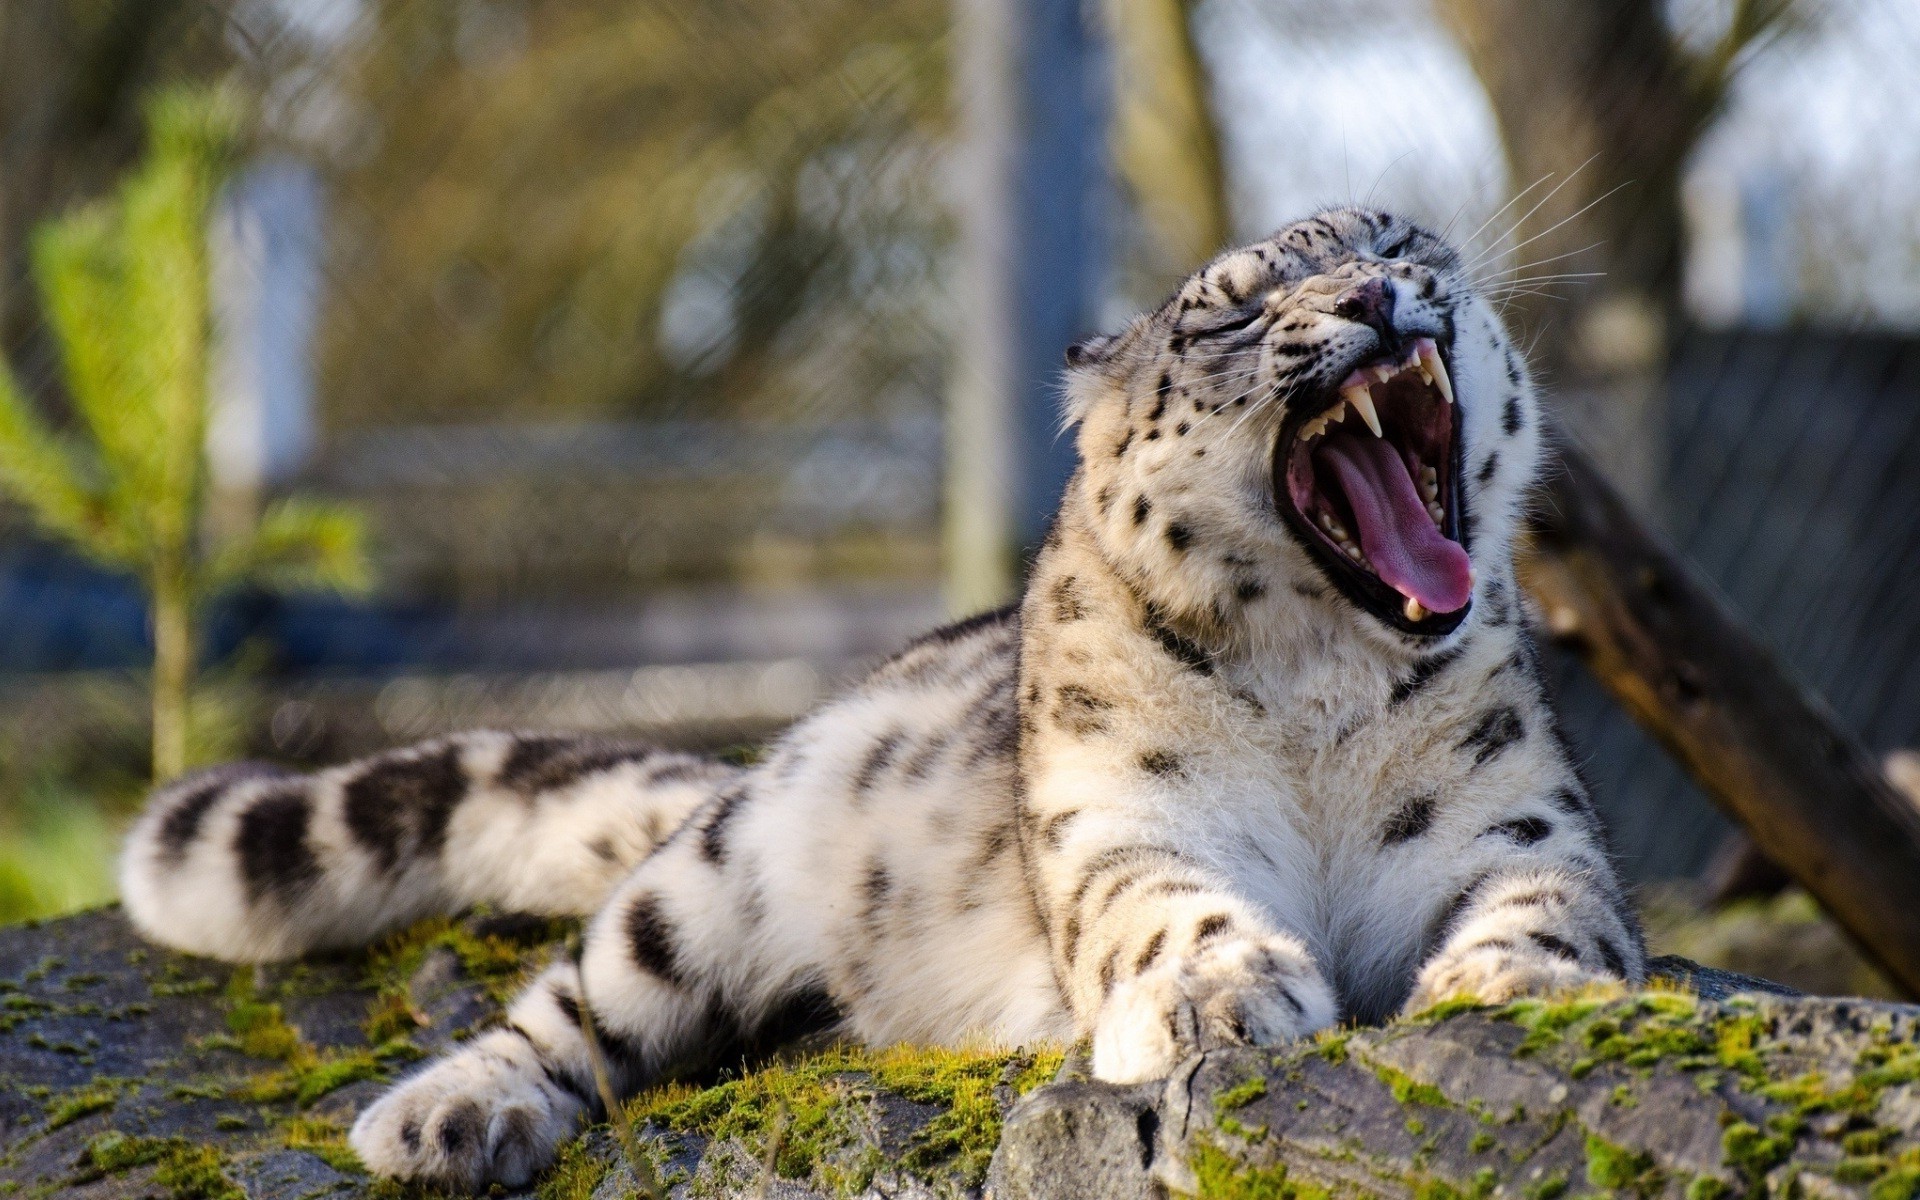 snow Leopards, Leopard, Animals, Nature, Big Cats, Open Mouth